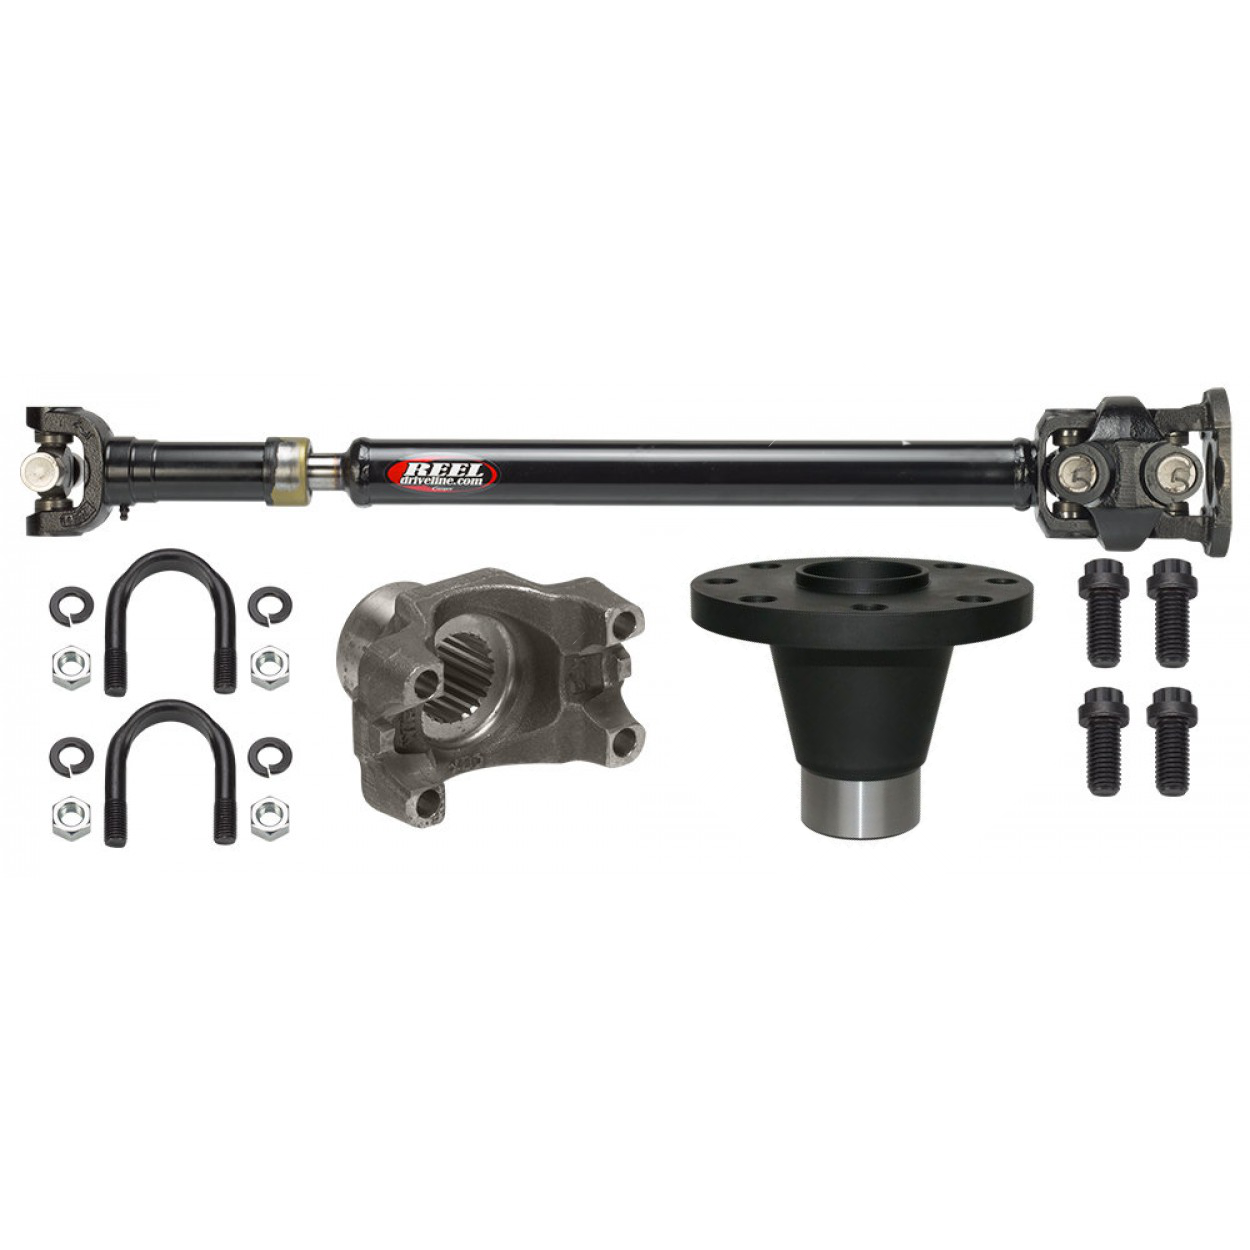 jeep-wrangler-jl-sport-20l-turbo-1350-heavy-duty-front-driveshaft-with-double-cardan-joint